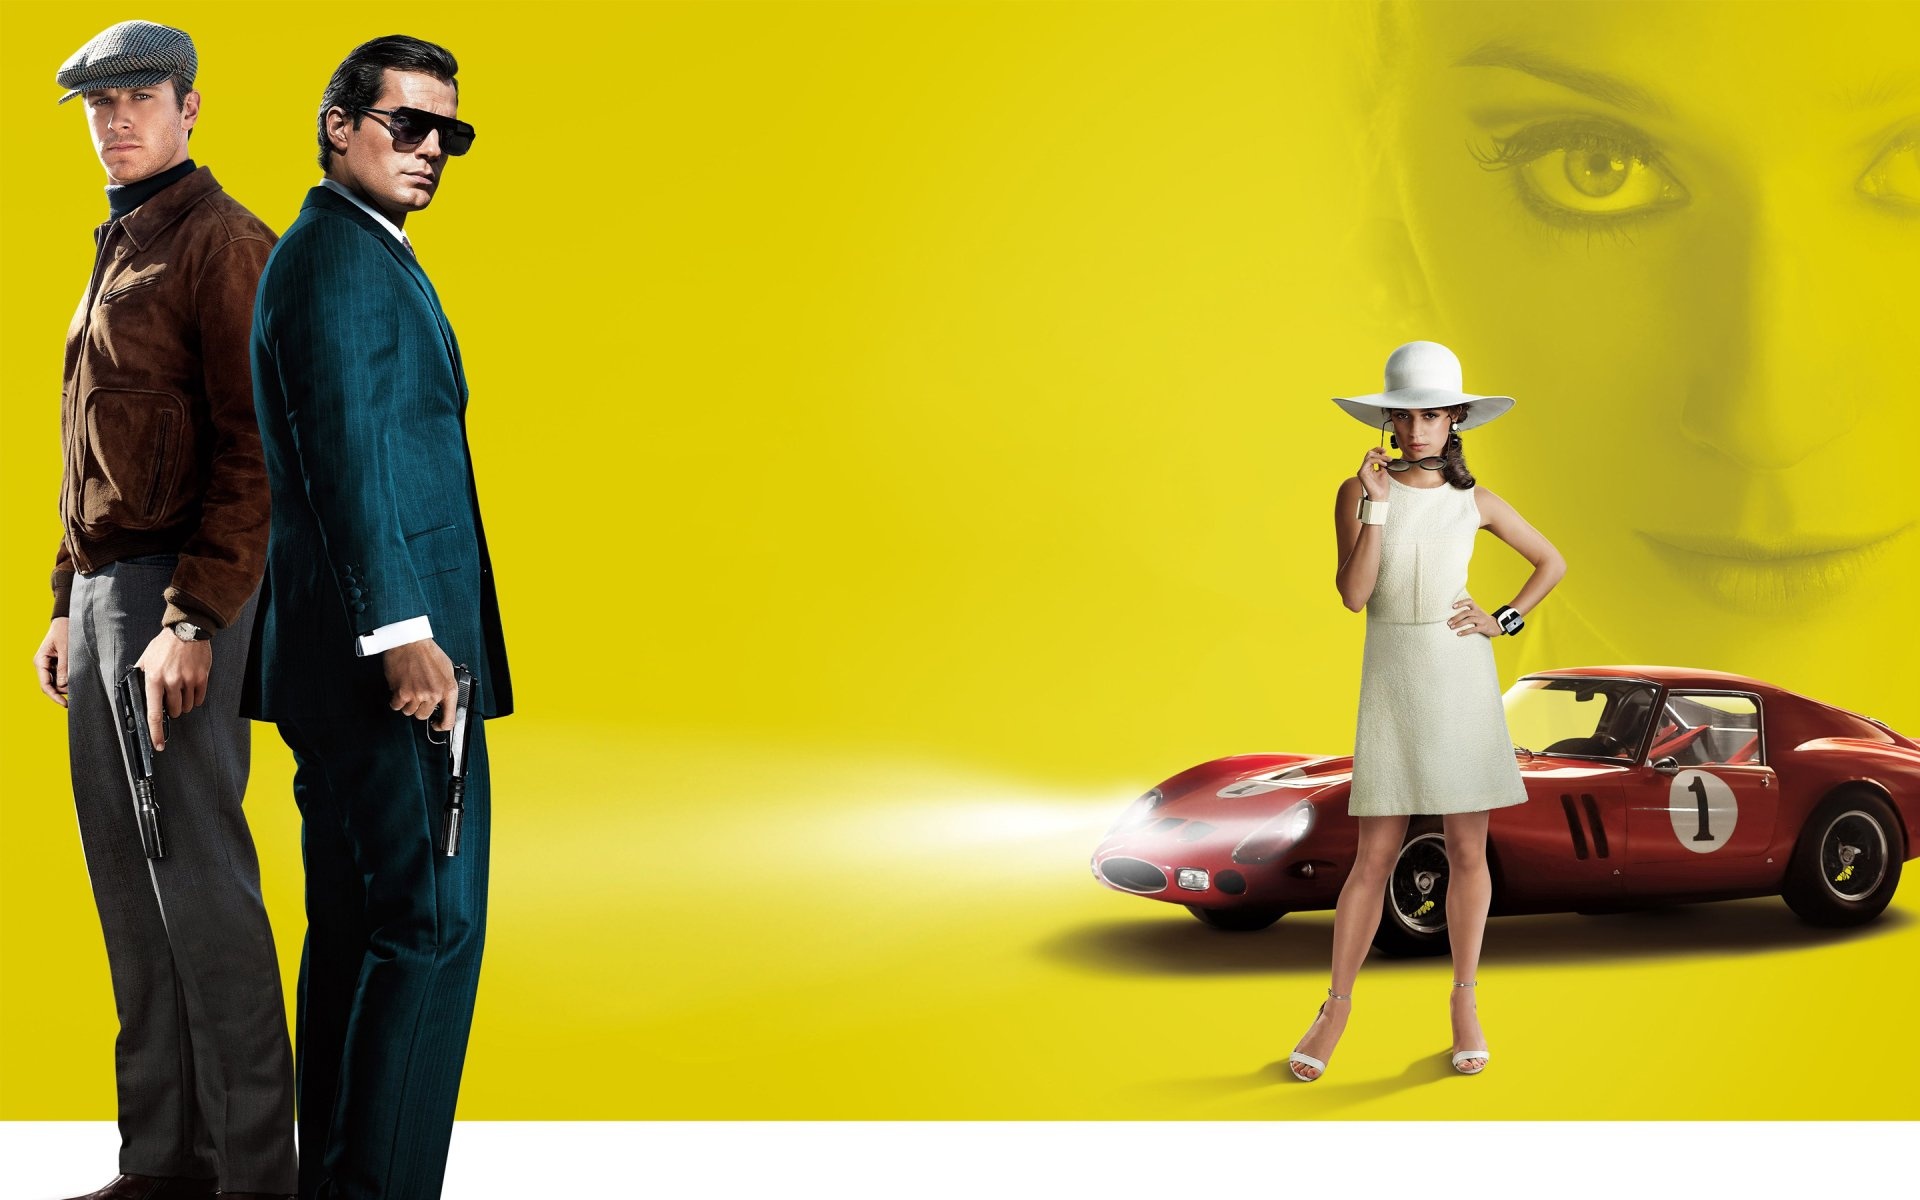 The Man from U.N.C.L.E., HD wallpapers, Background images, Stylish spies, 1920x1200 HD Desktop